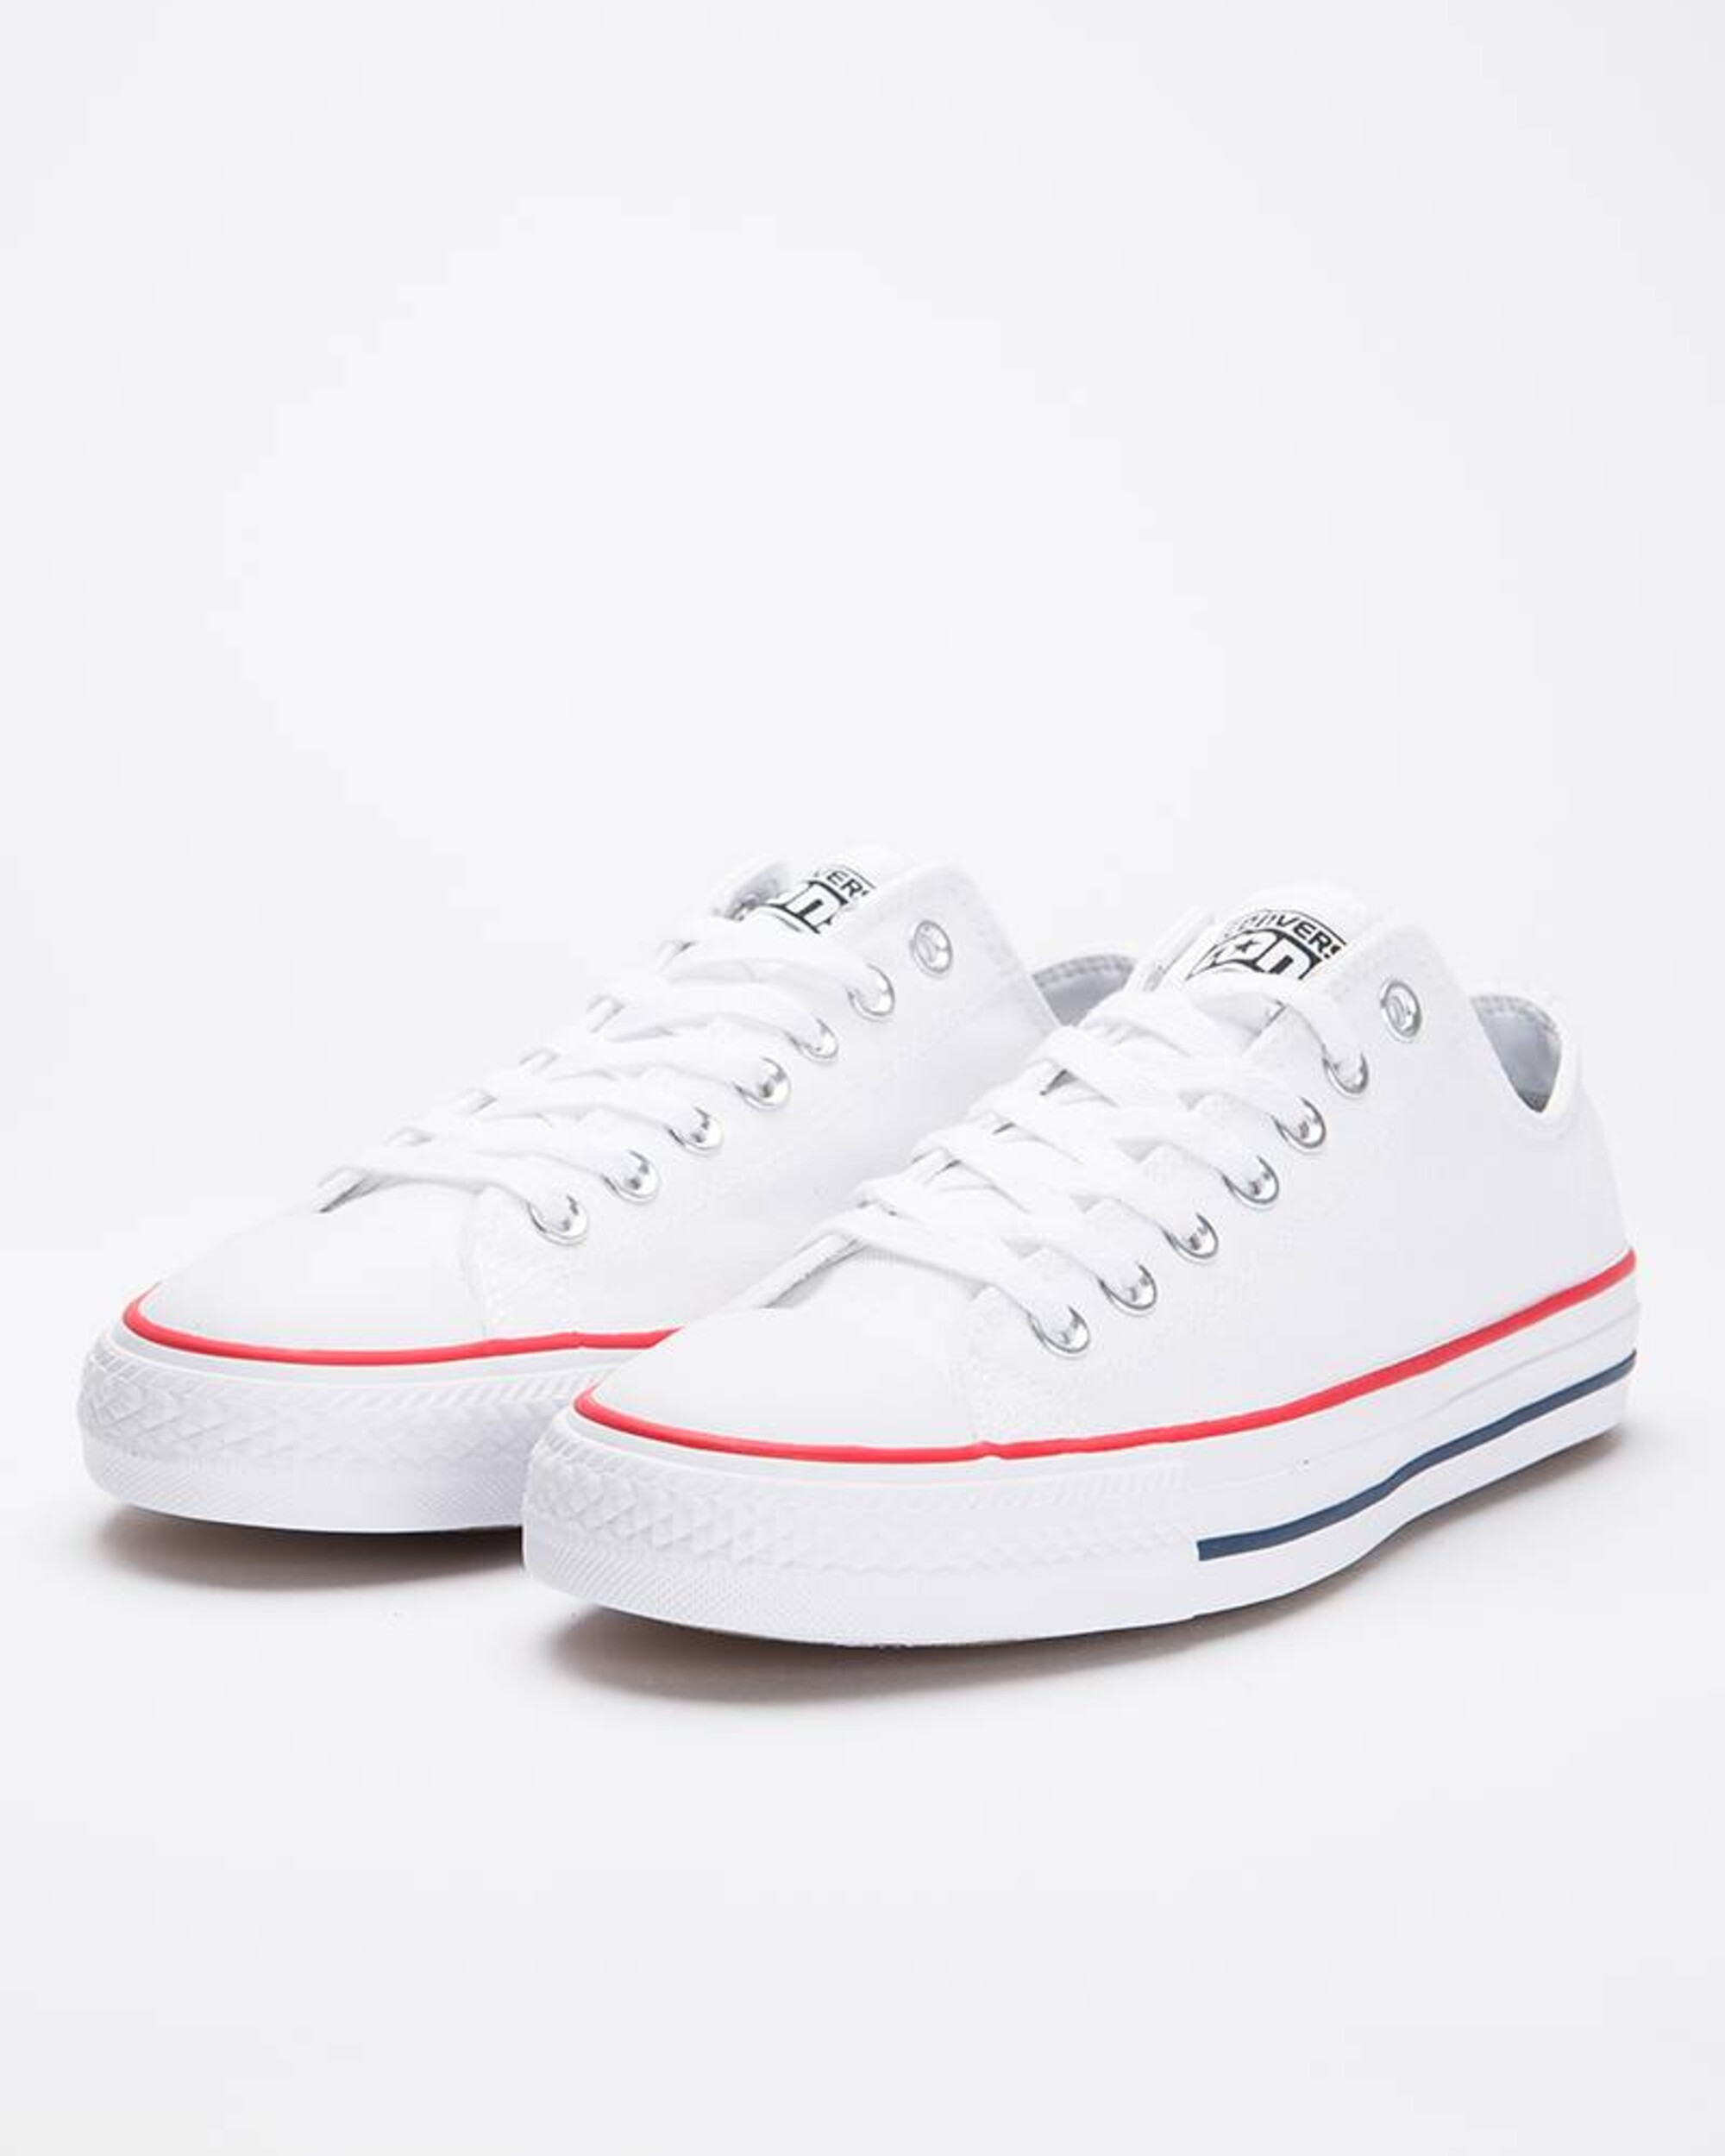 Converse  Ctas Pro Ox White/Red/Blue